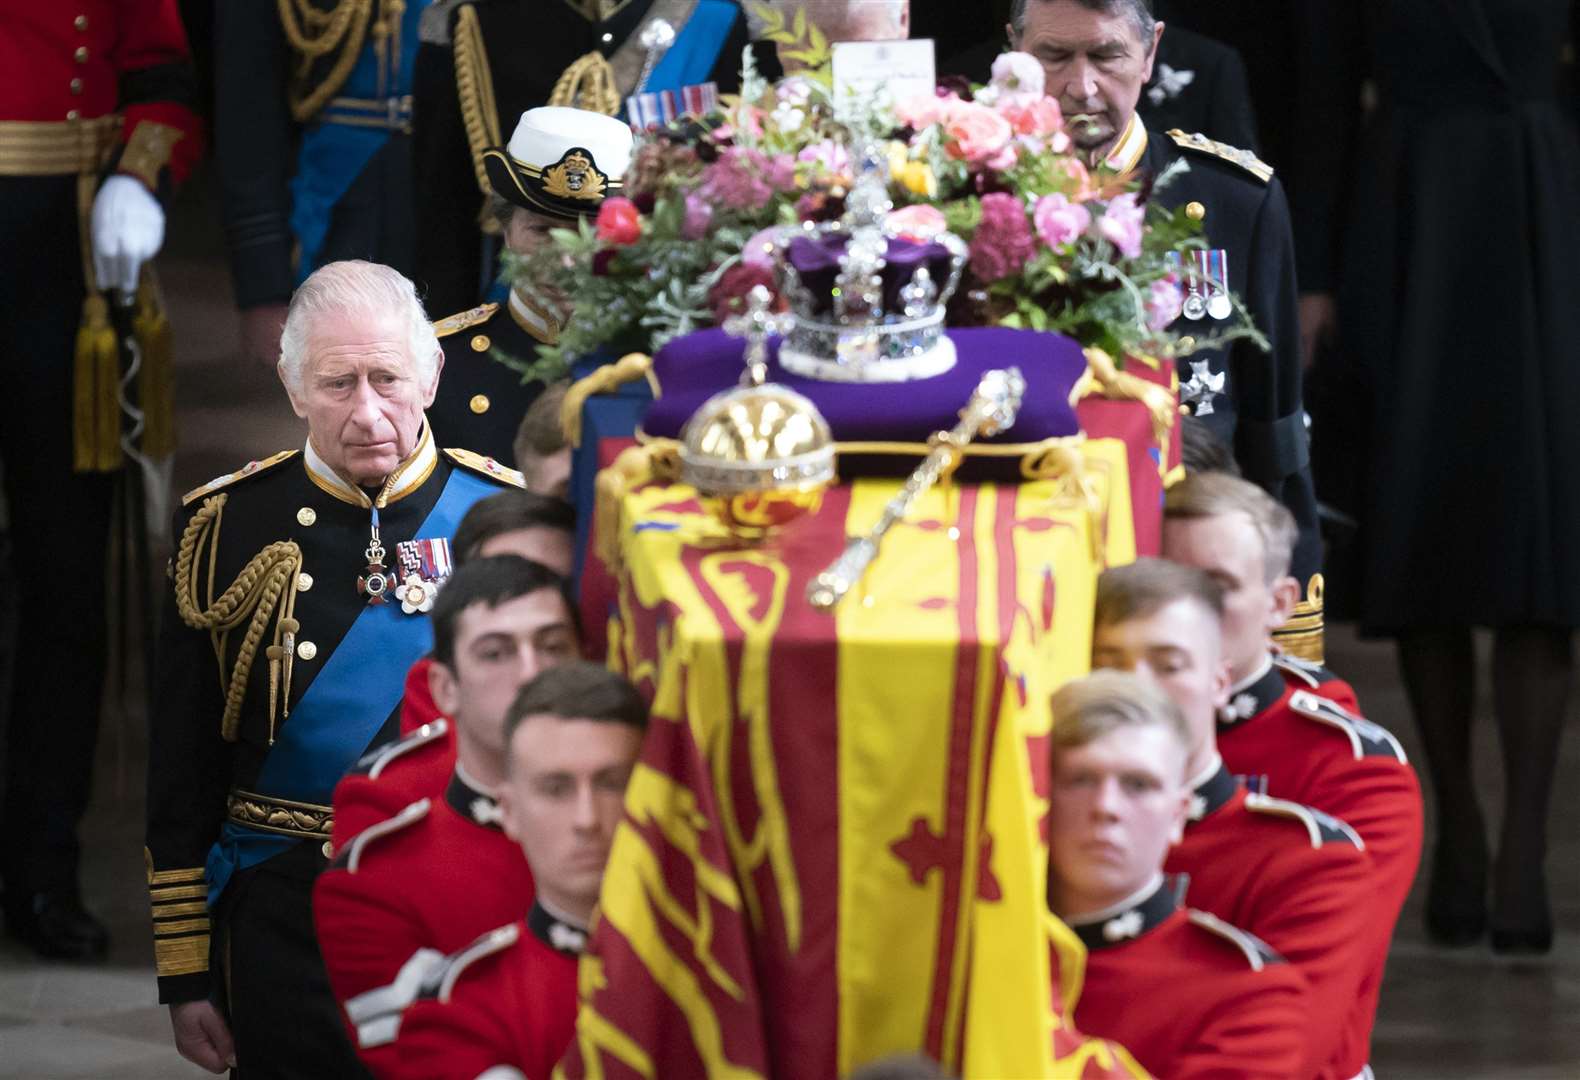 The King walking behind the Queen’s coffin (Danny Lawson/PA)